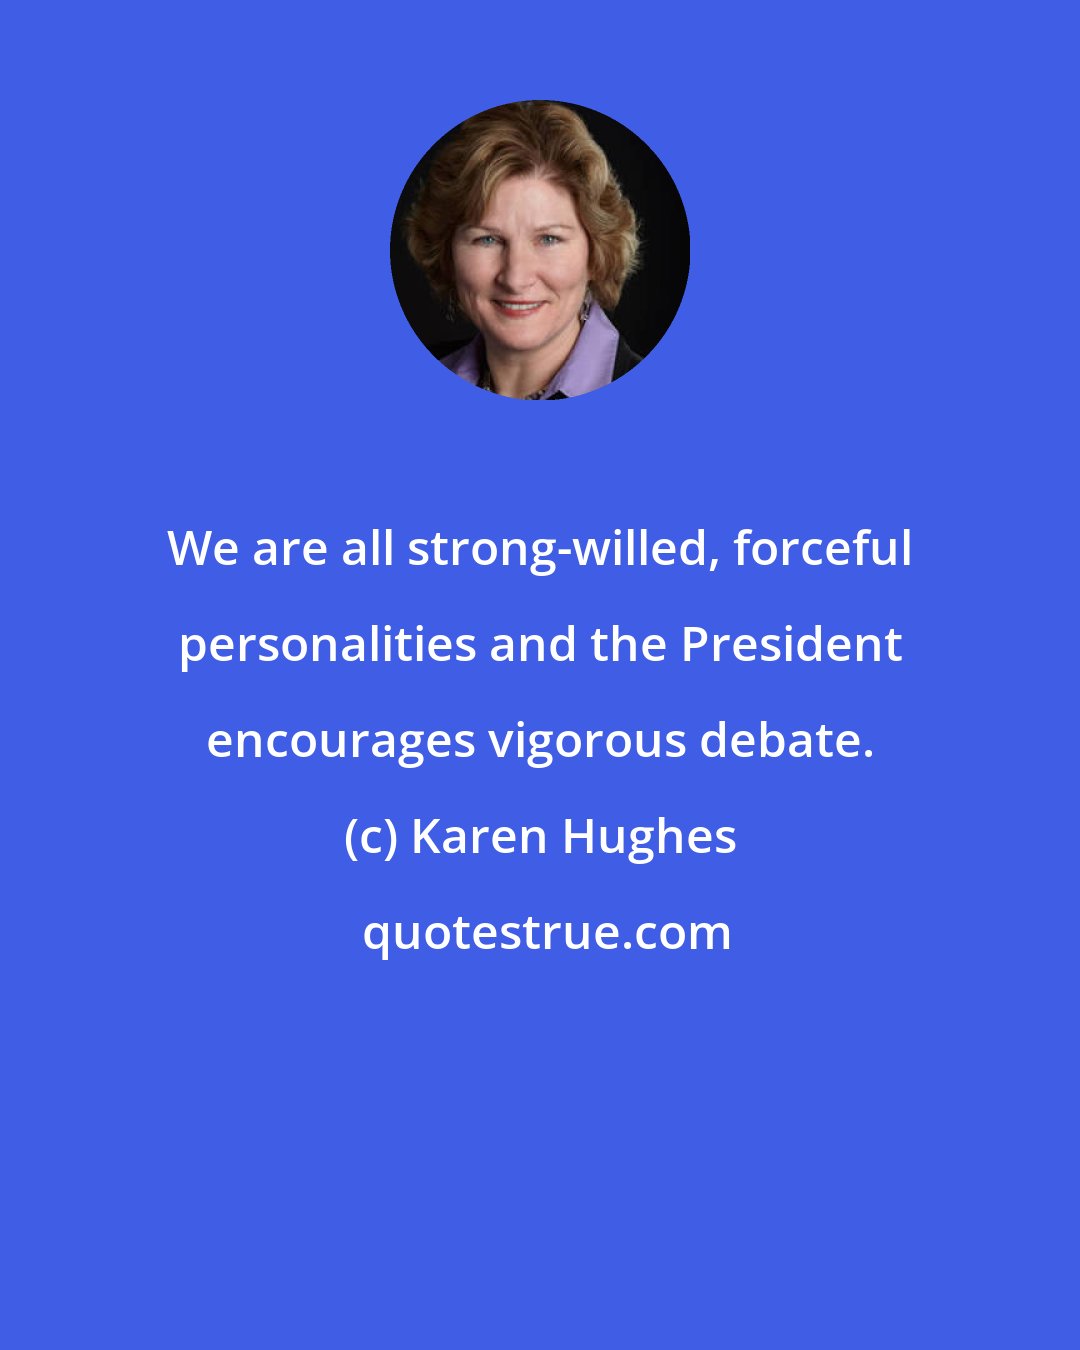 Karen Hughes: We are all strong-willed, forceful personalities and the President encourages vigorous debate.